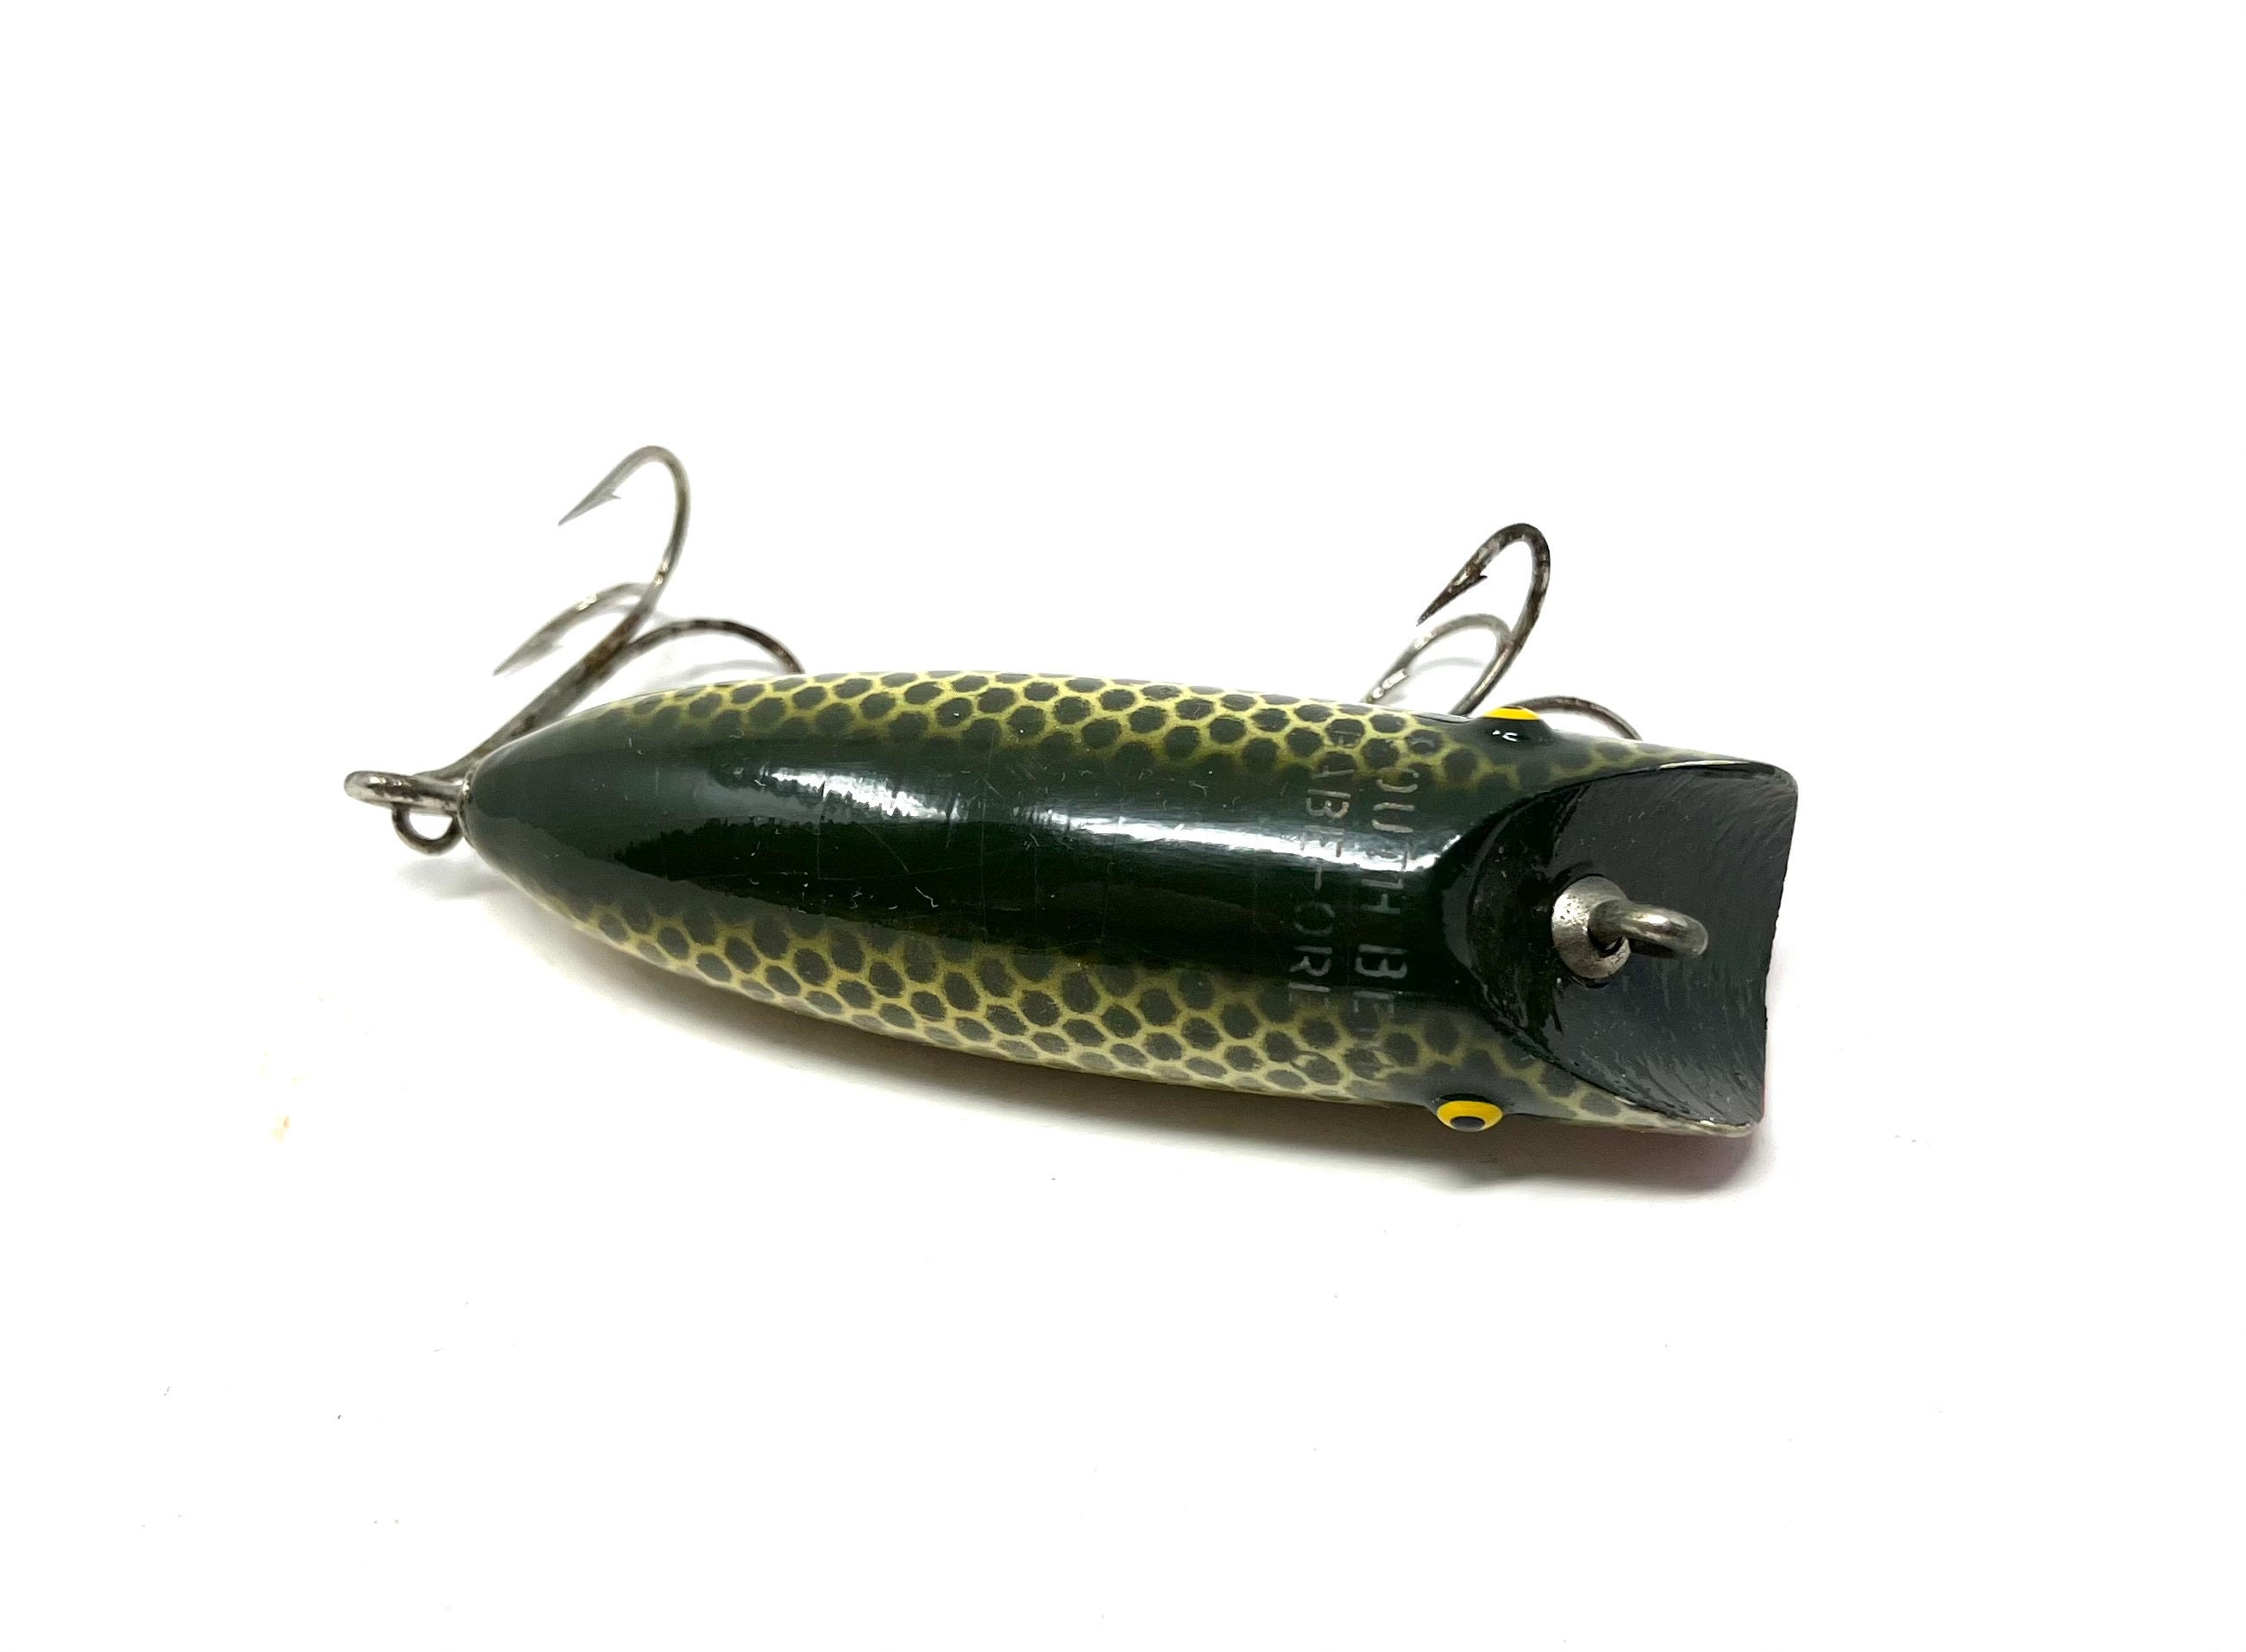 ToughLures.com Old Vintage Fishing Lures For Sale - Here's a tough one for  all the fly rod lure collectors out there! This South Bend Black Dragon Bug  is very nice and unused!